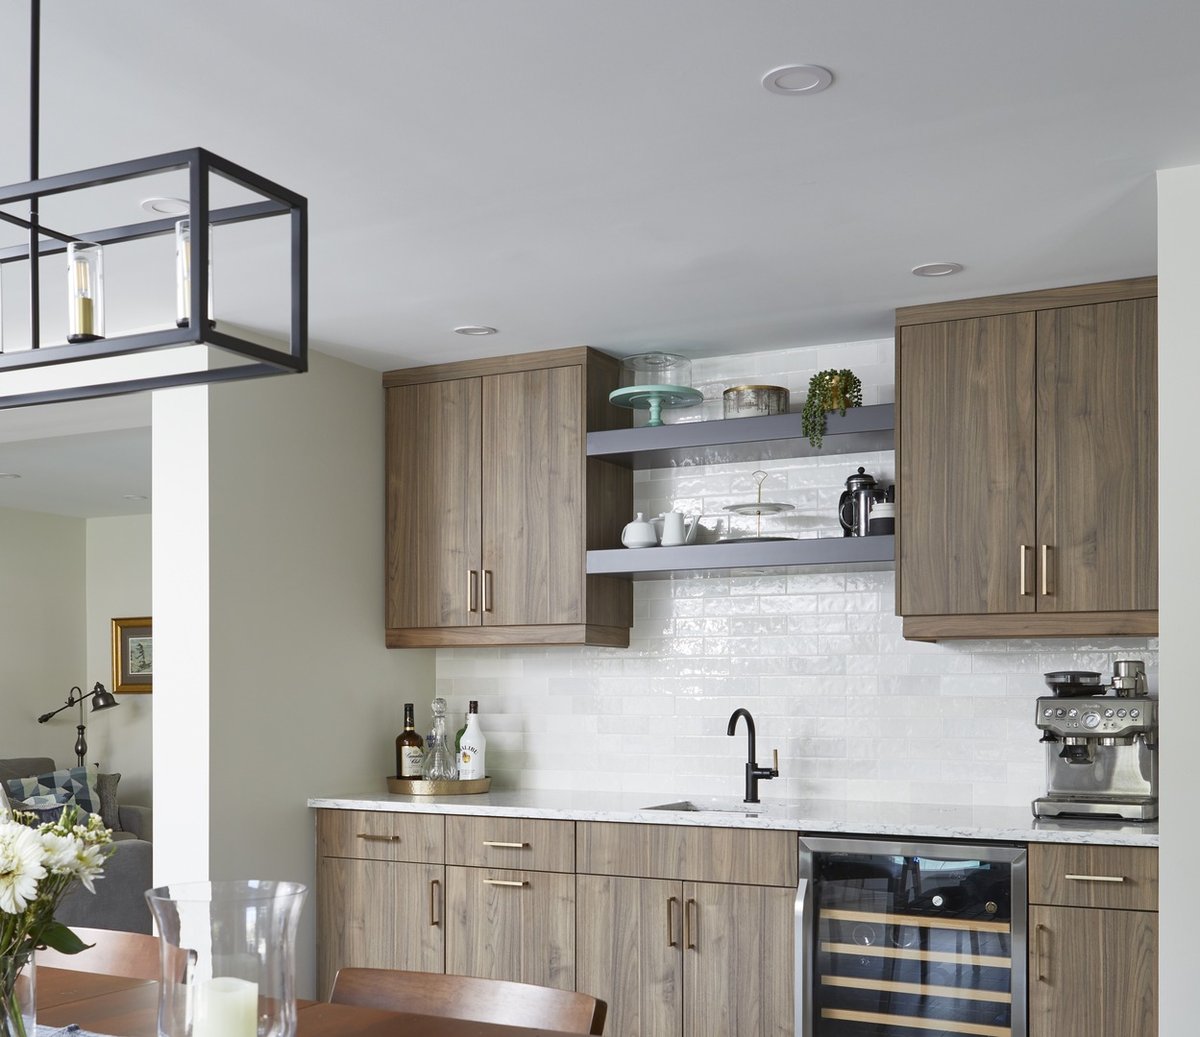 Beverage station area with built-in wine fridge and dining table view below pendant lighting